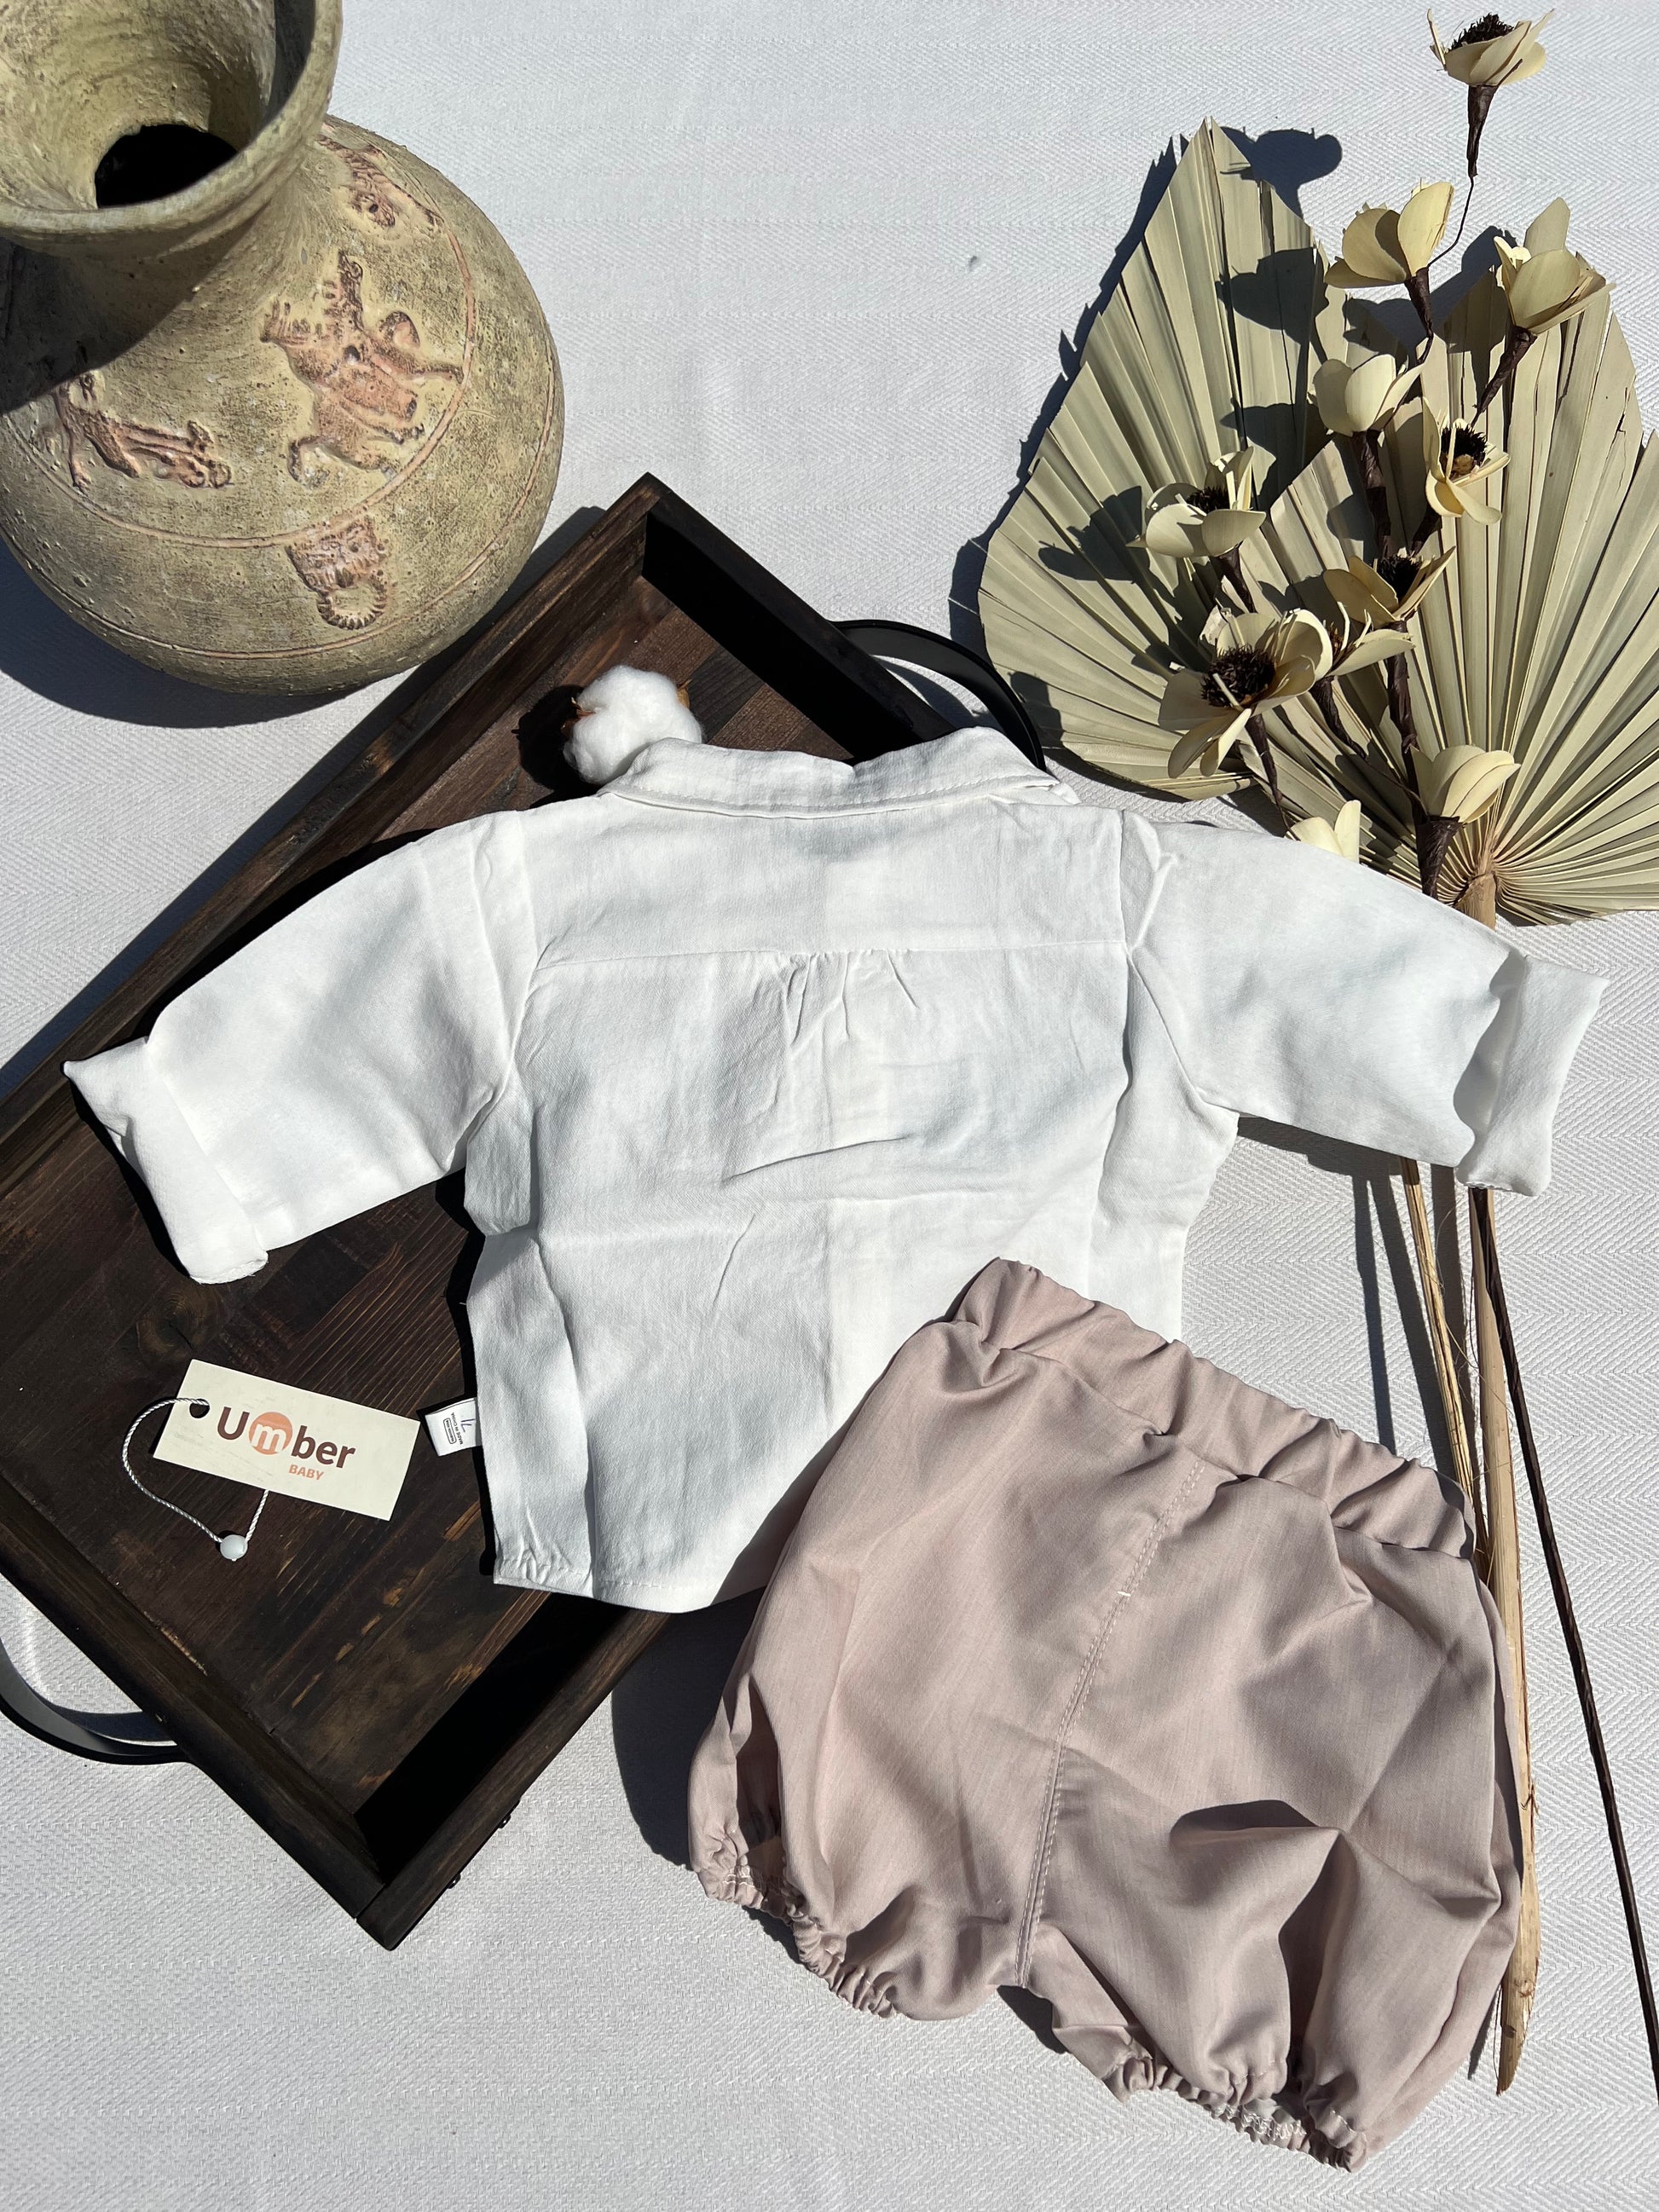 Back of Formal Baby Three Piece Set with White Button-up Dress Shirt, Latte Colored Shorts, and Matching Bow Tie